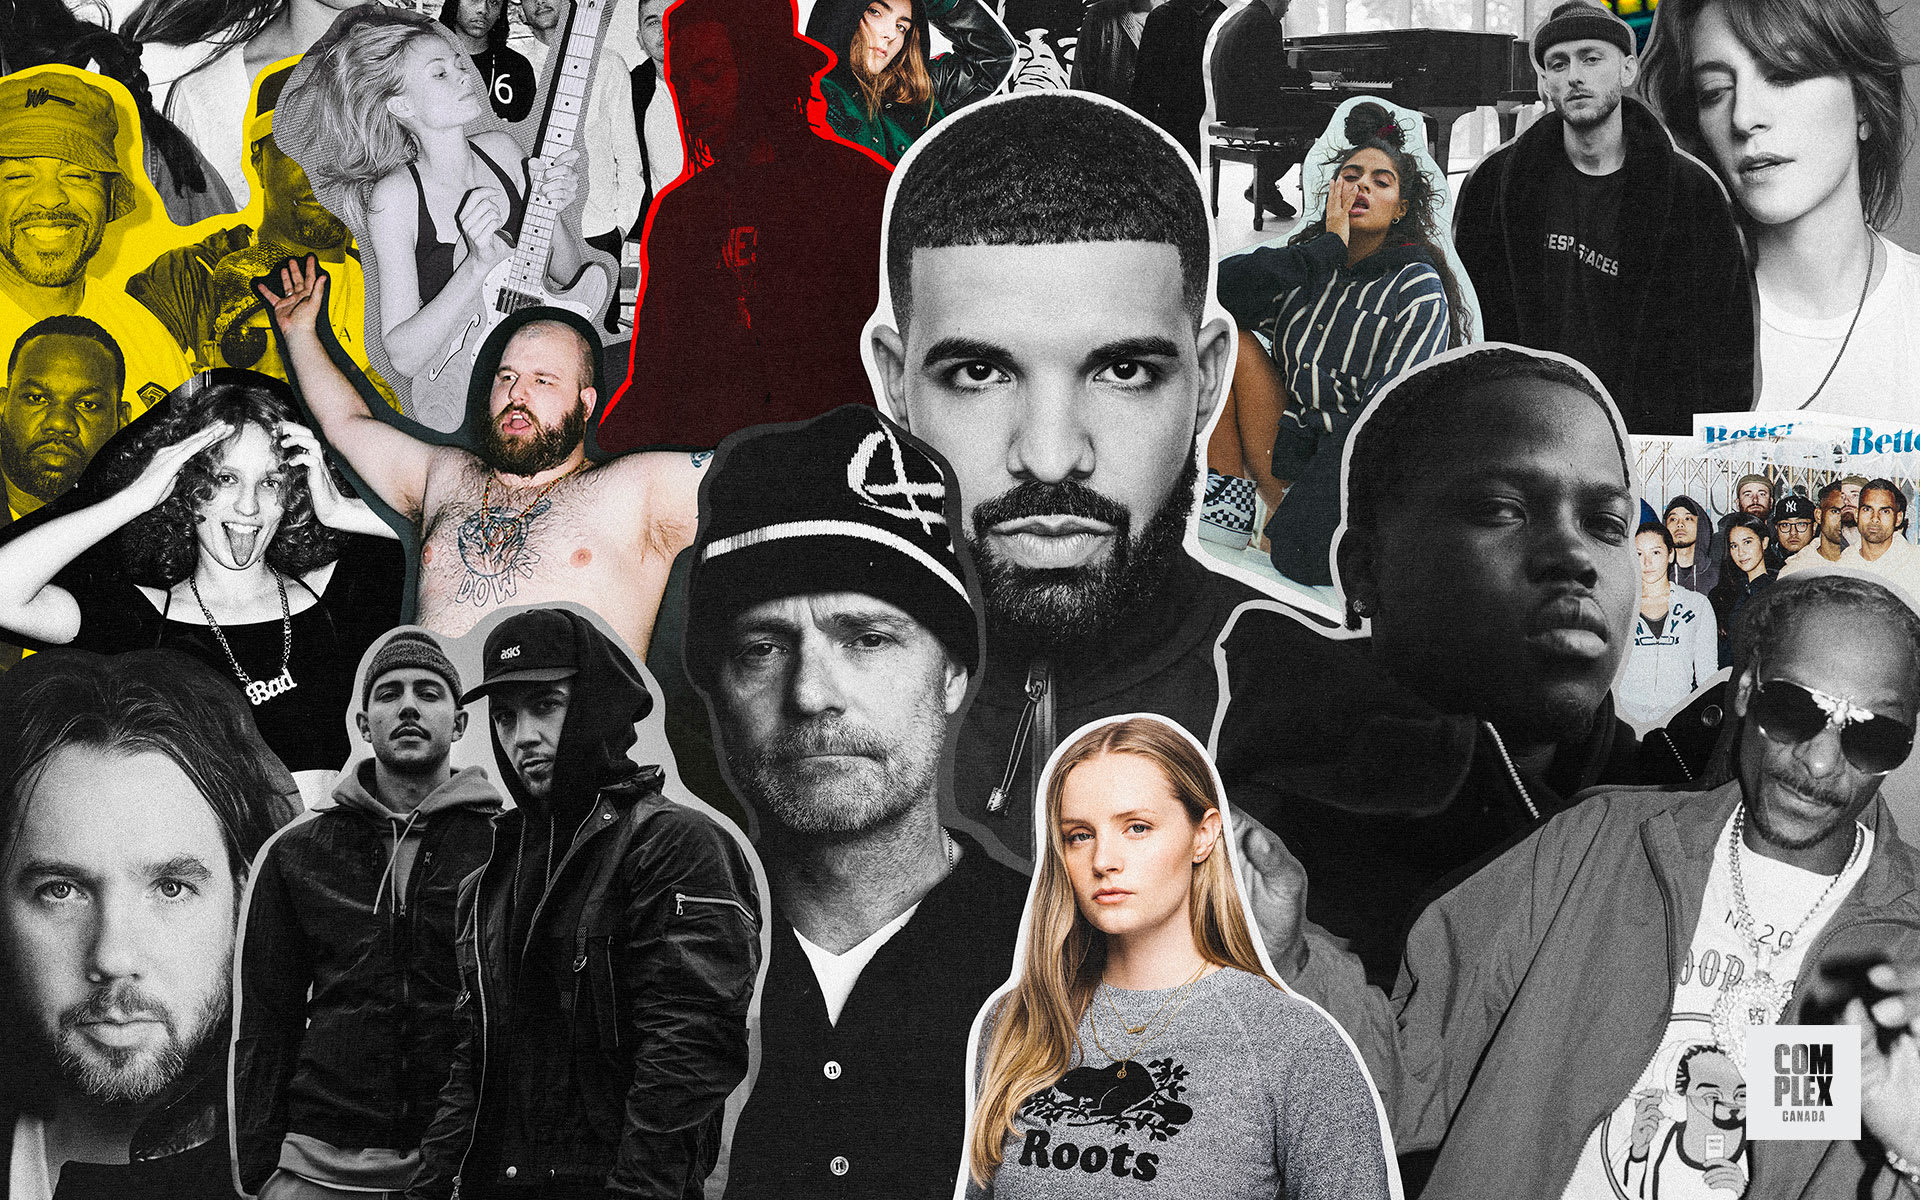 The last 20 years of Canada's music scene, including Drake, Tragically Hip, Jessie Reyez